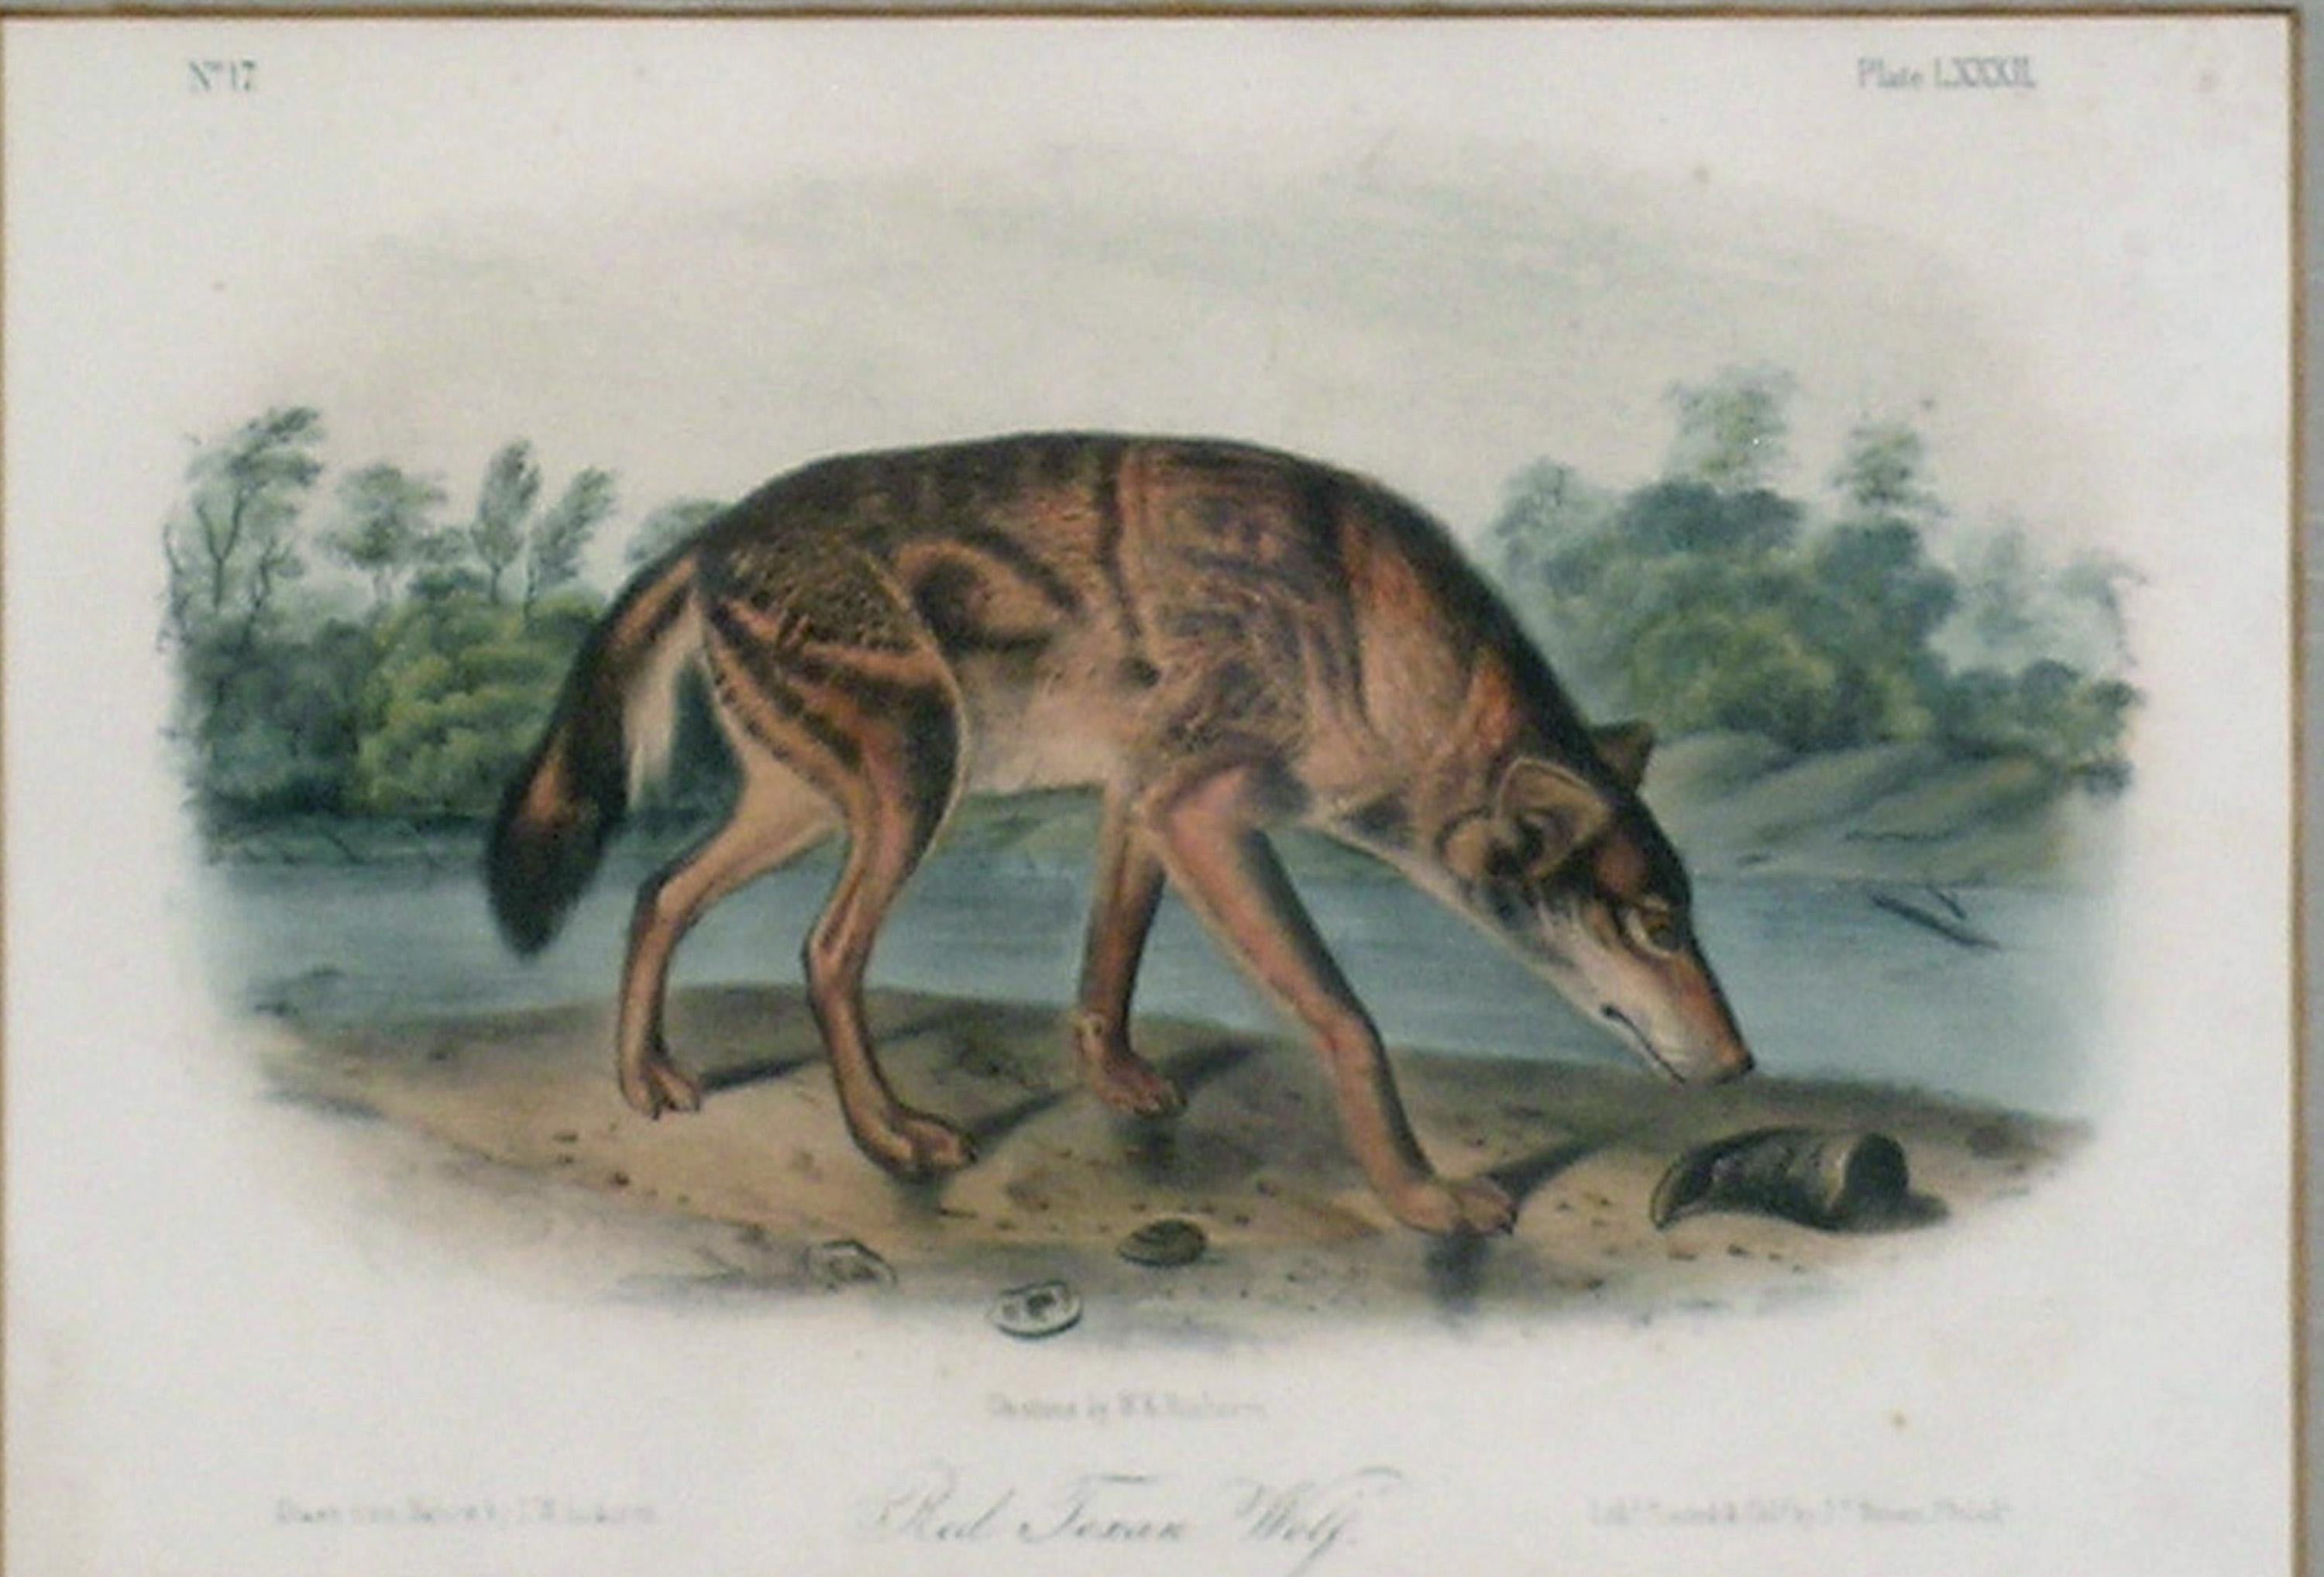 the imperial collection of audubon animals